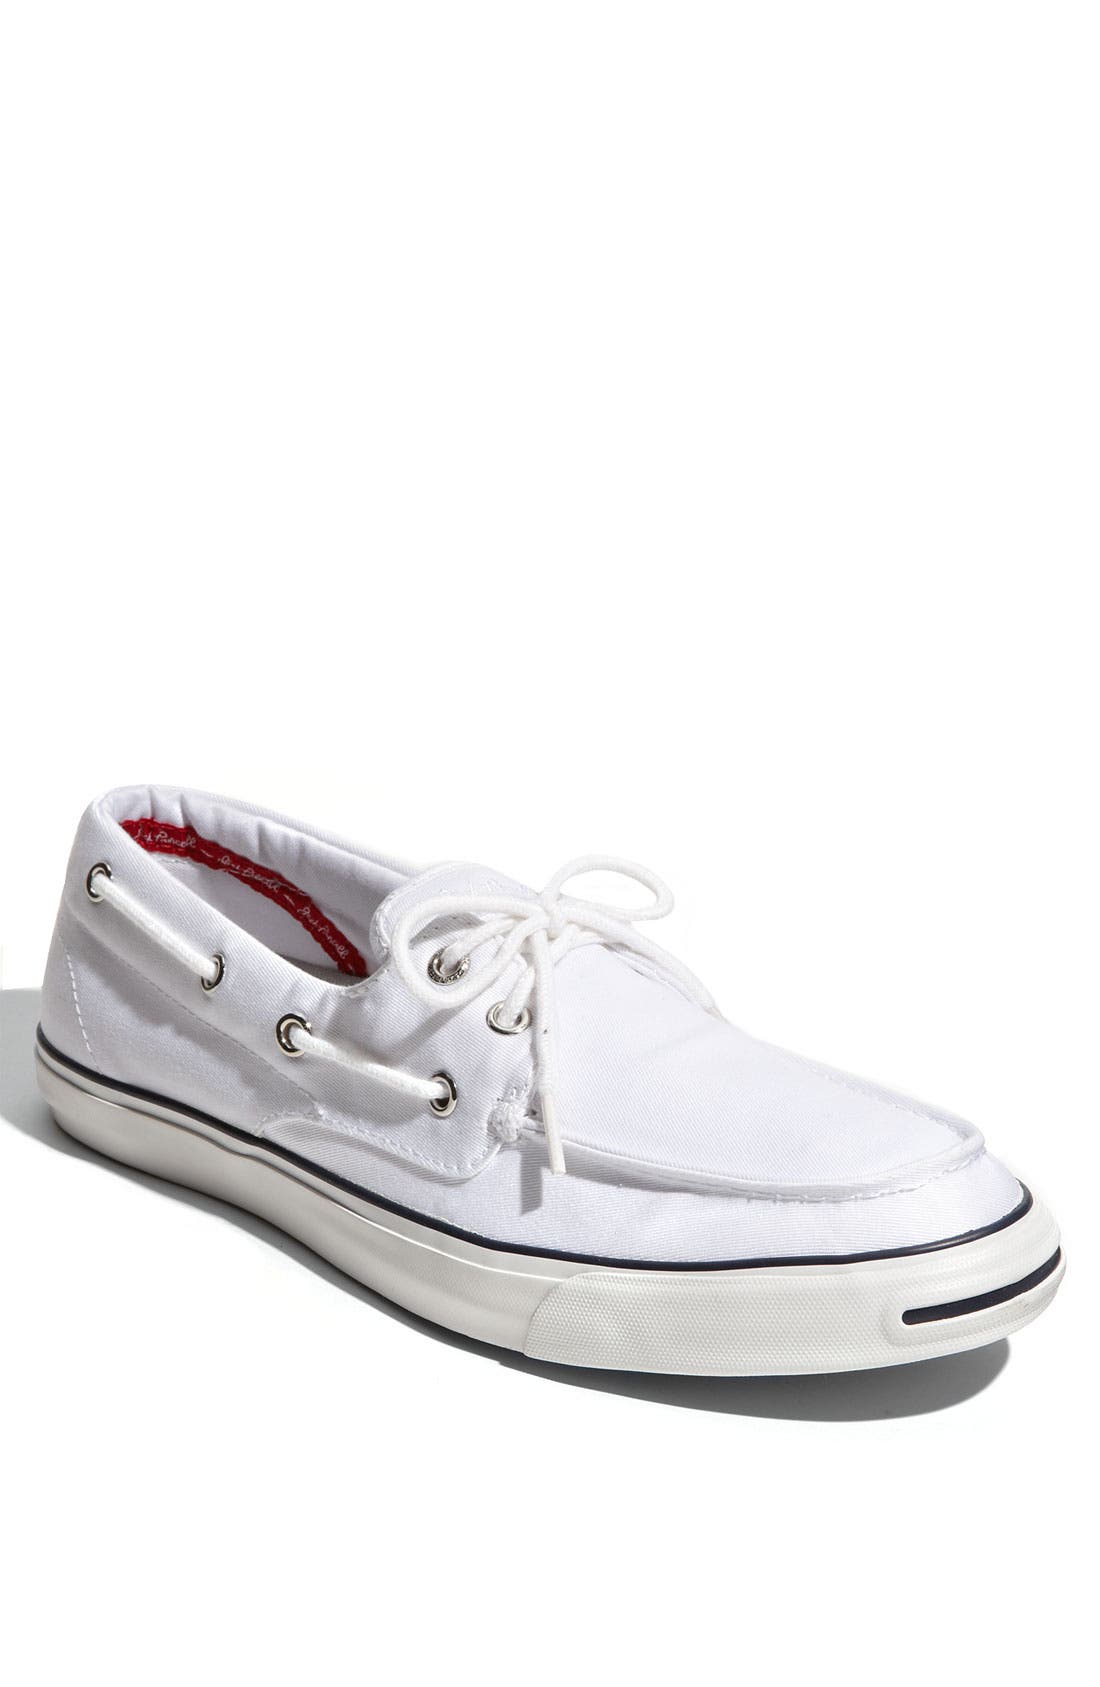 Converse 'Jack Purcell' Boat Shoe 